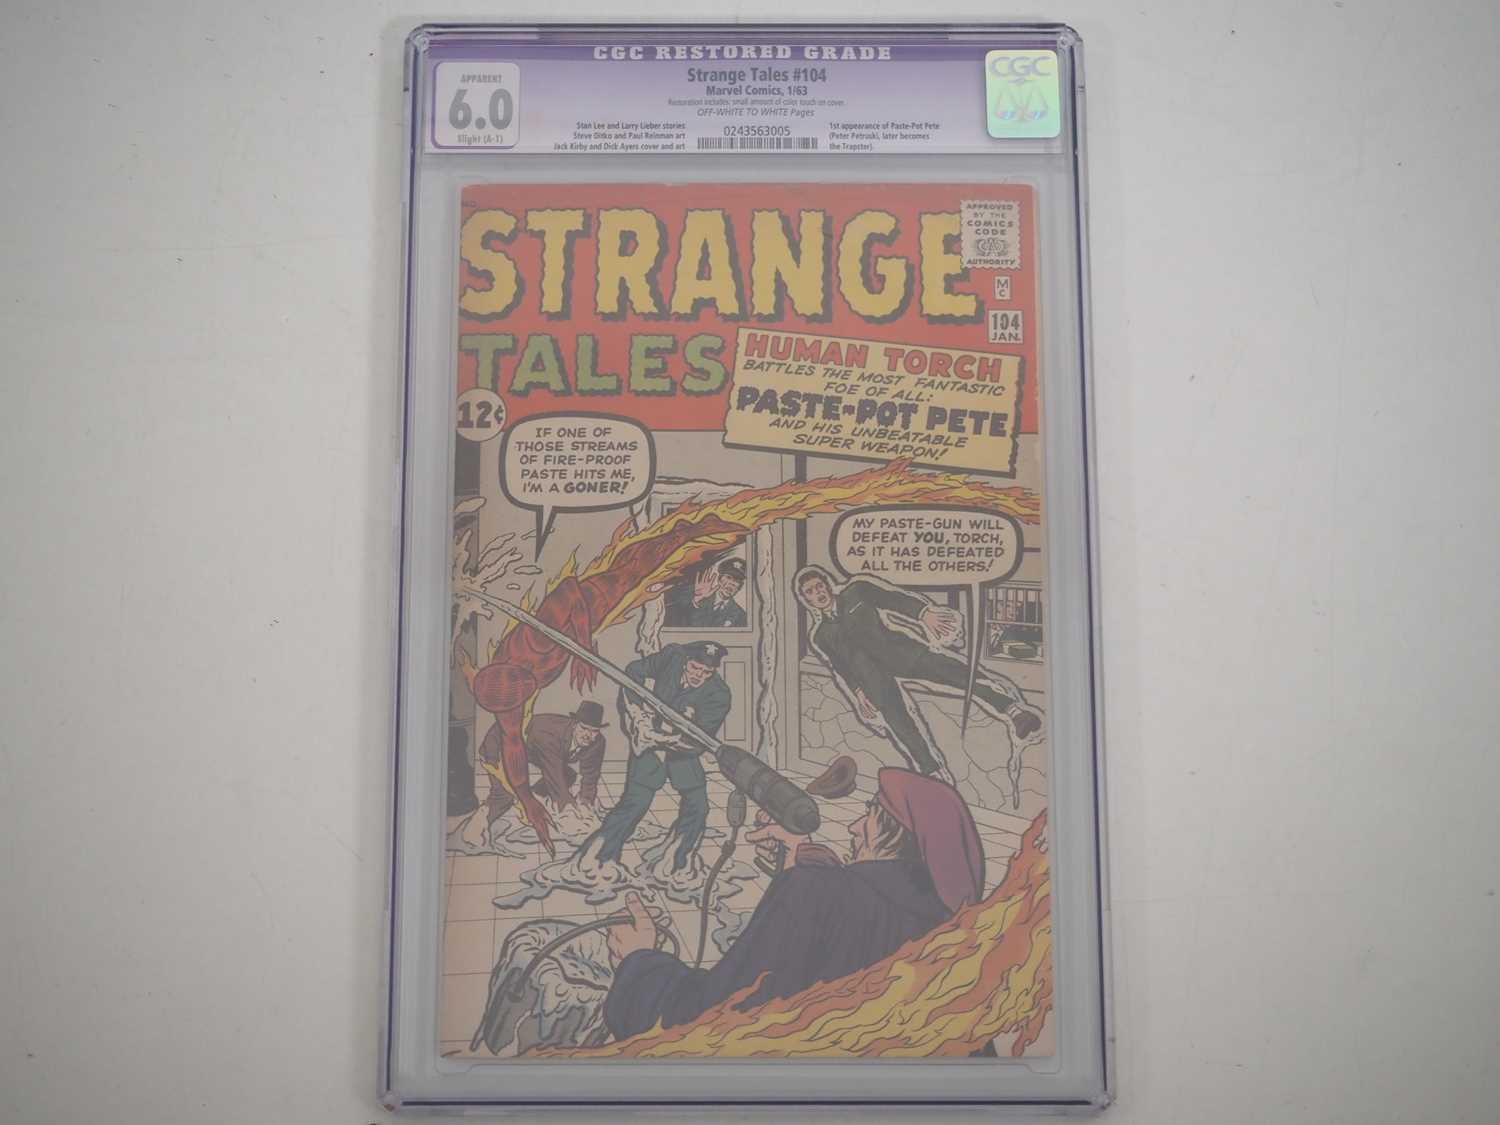 STRANGE TALES #104 (1963 - MARVEL) GRADED 6.0 (RESTORED) by CGC - Includes the first appearance of